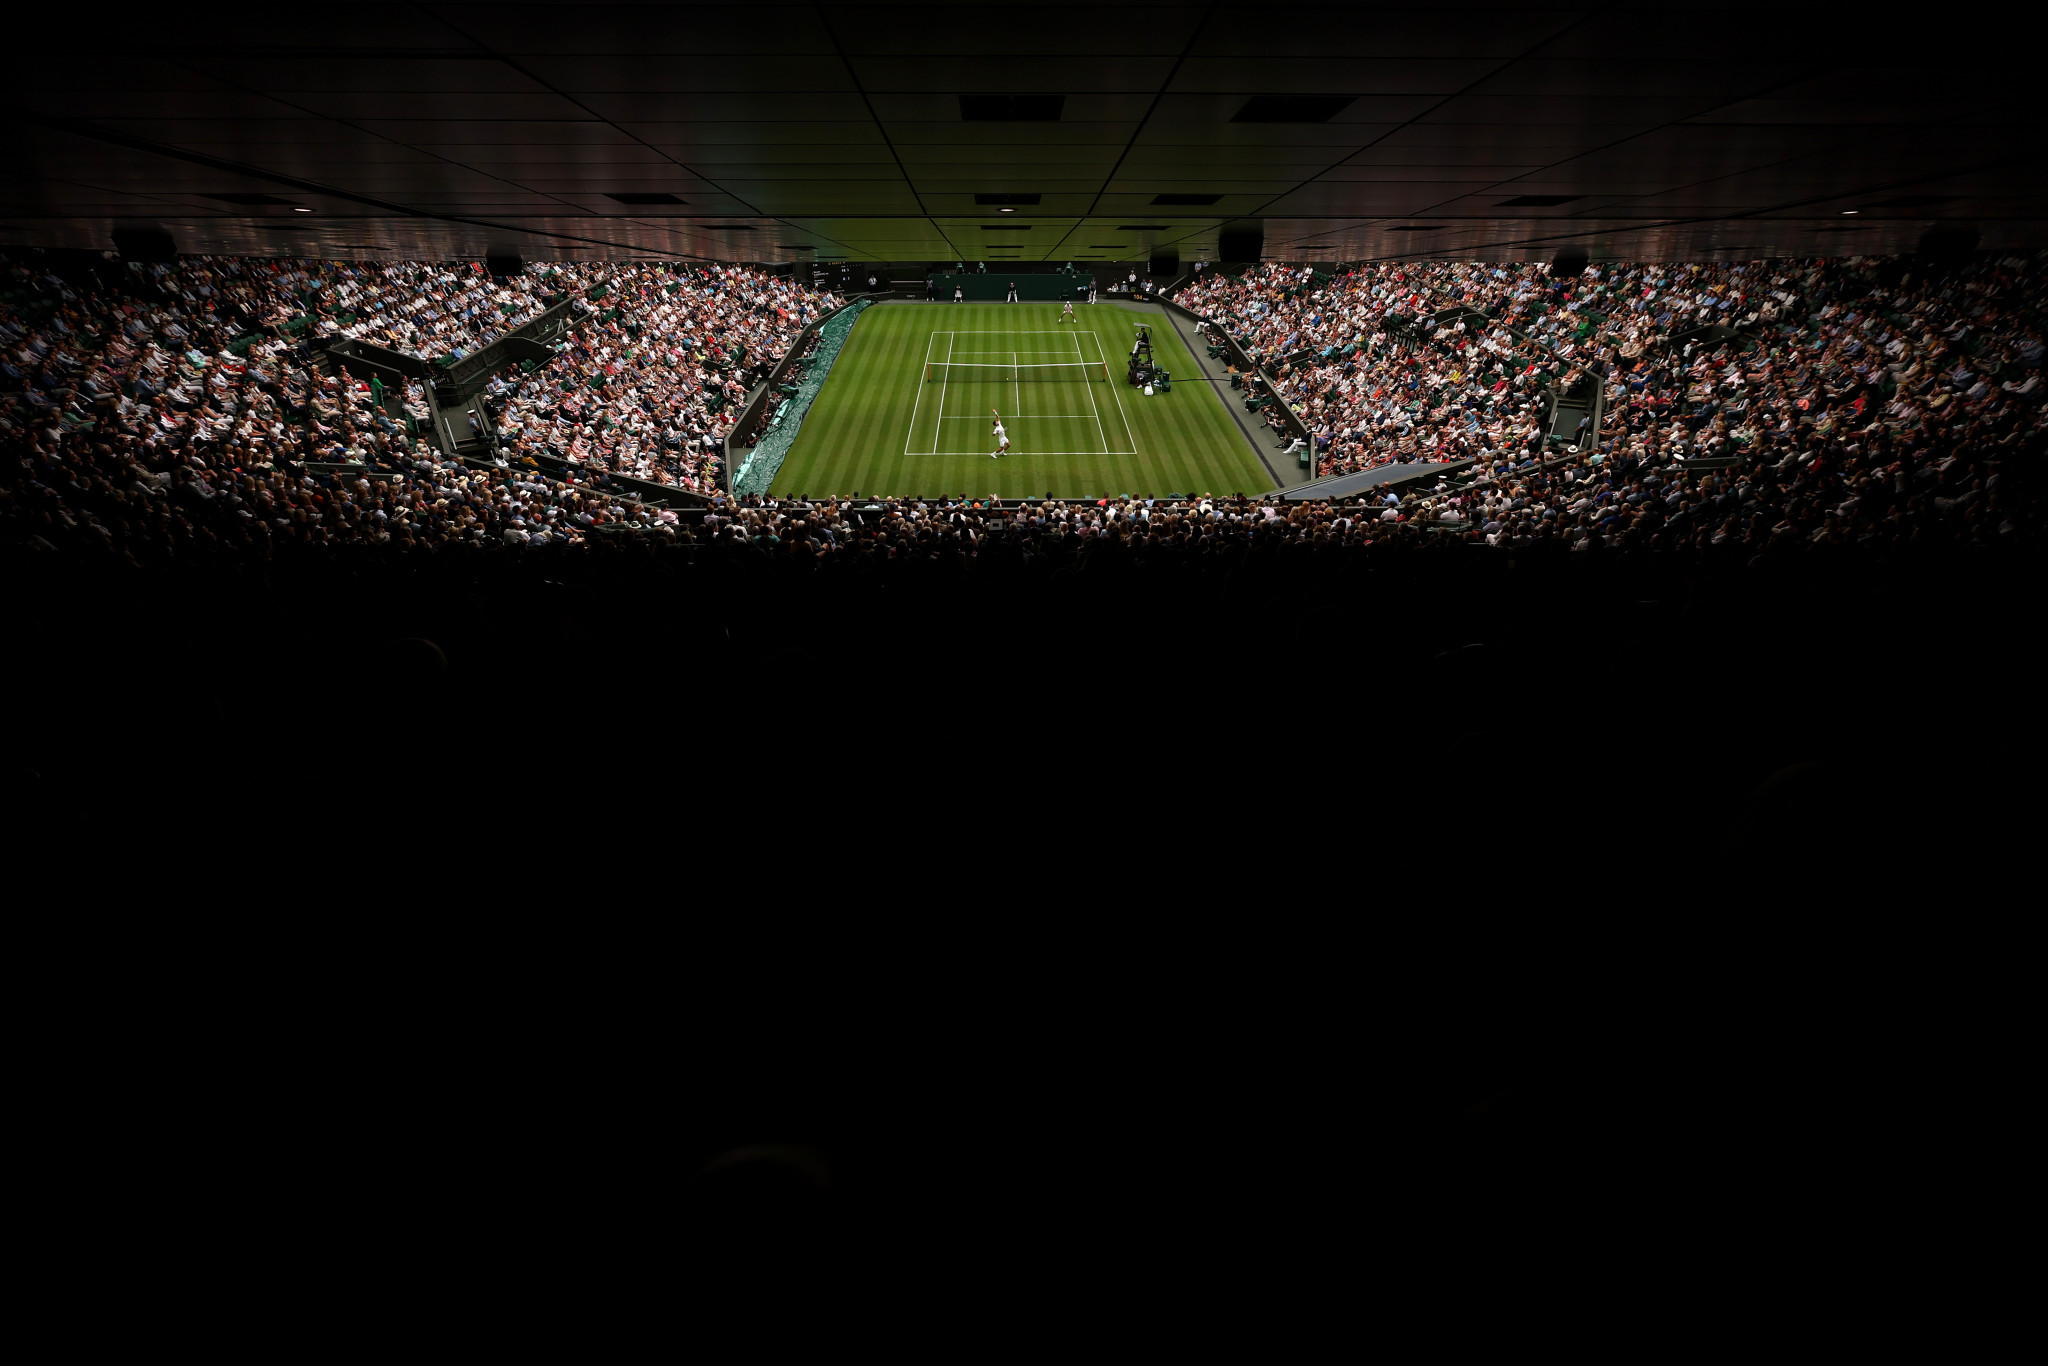 Capacity crowds have returned to this year's Wimbledon ©Getty Images